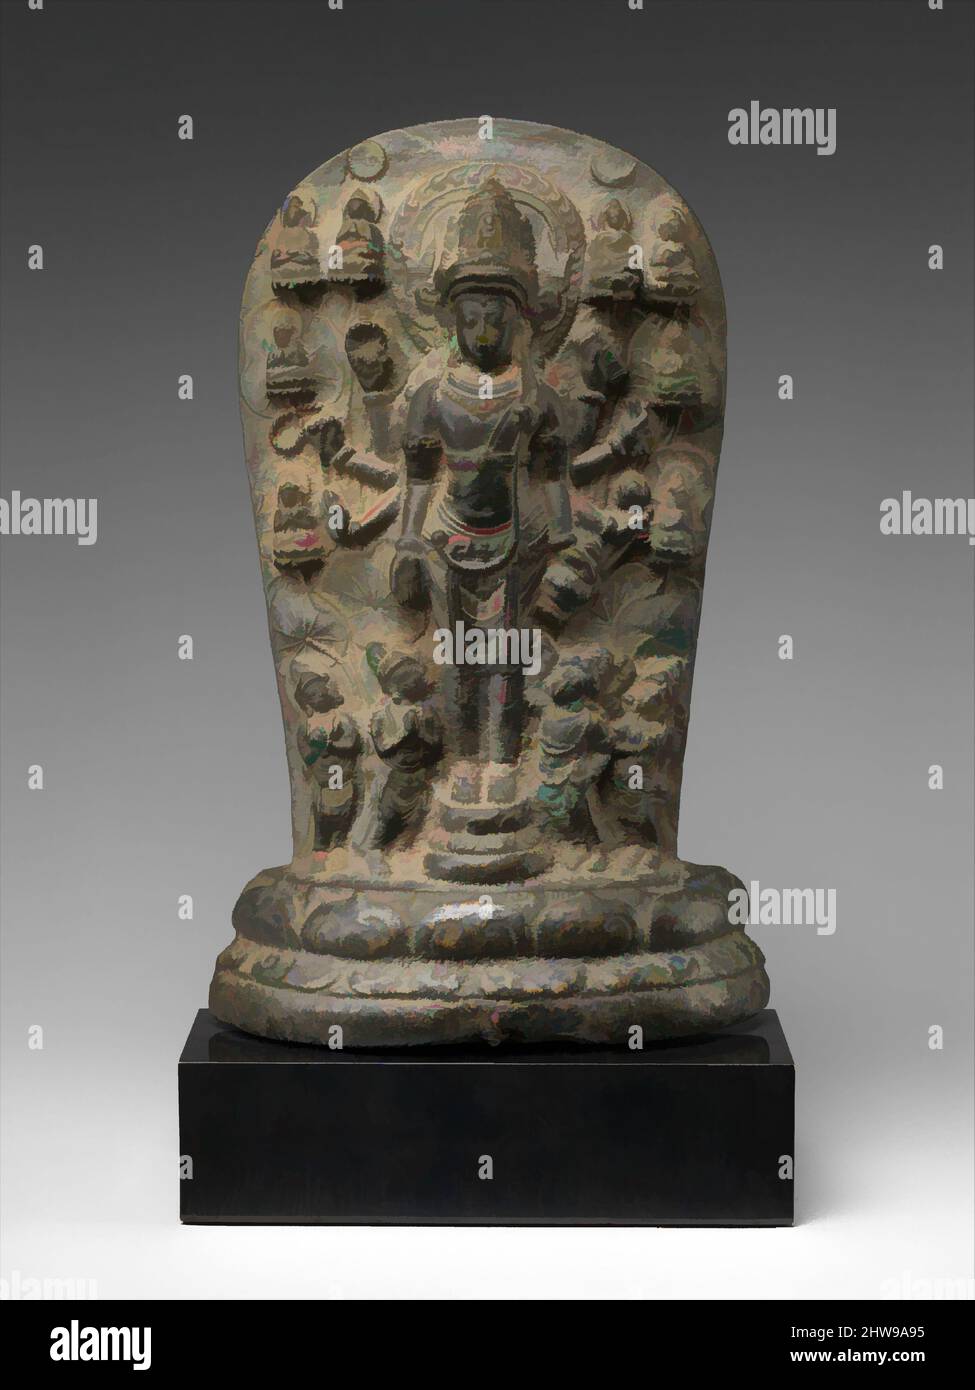 Art inspired by Candi Jago plaque of the Bodhisattva Amoghapasa, Singasari kingdom, late 13th century, probably 1286–92, Indonesia (East Java), Copper alloy, H. 8 3/4 in. (22.2 cm); W. 5 1/2 in. (14 cm); D. 1 5/8 in. (4.1 cm), Sculpture, This is one of a number of miniature versions of, Classic works modernized by Artotop with a splash of modernity. Shapes, color and value, eye-catching visual impact on art. Emotions through freedom of artworks in a contemporary way. A timeless message pursuing a wildly creative new direction. Artists turning to the digital medium and creating the Artotop NFT Stock Photo